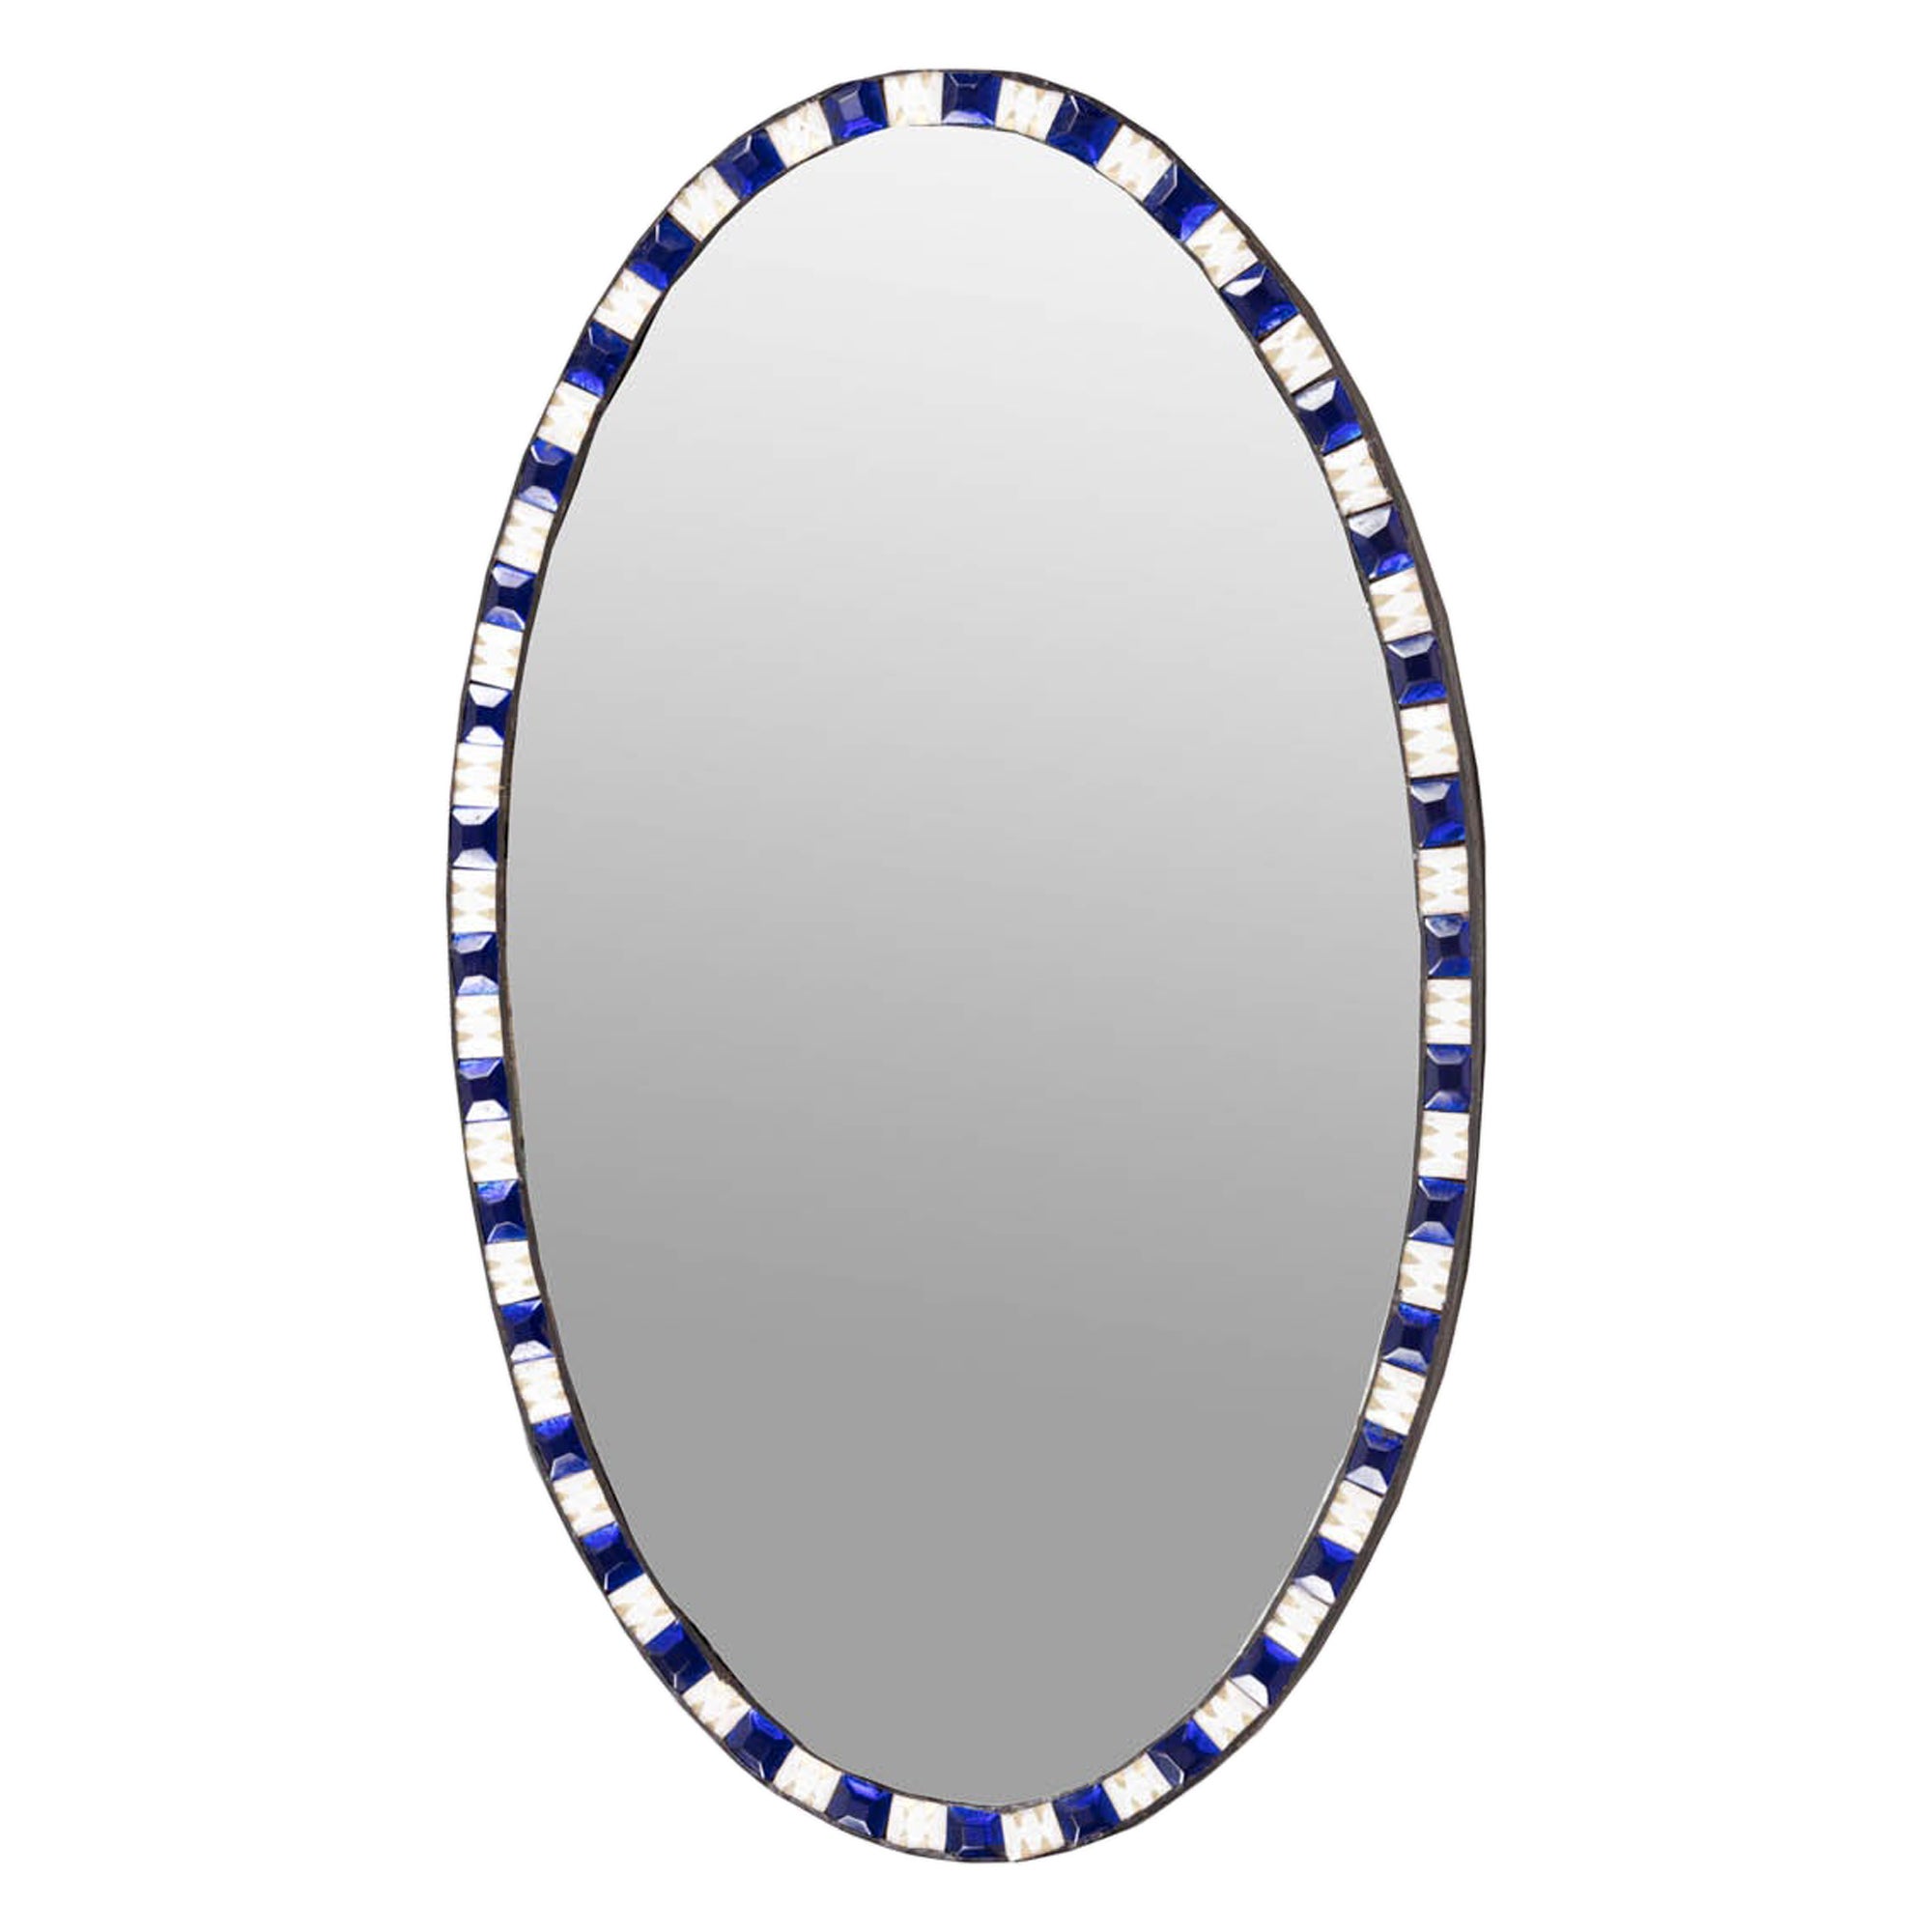 19th Century Irish Waterford Mirror With Blue & Clear Glass Studs